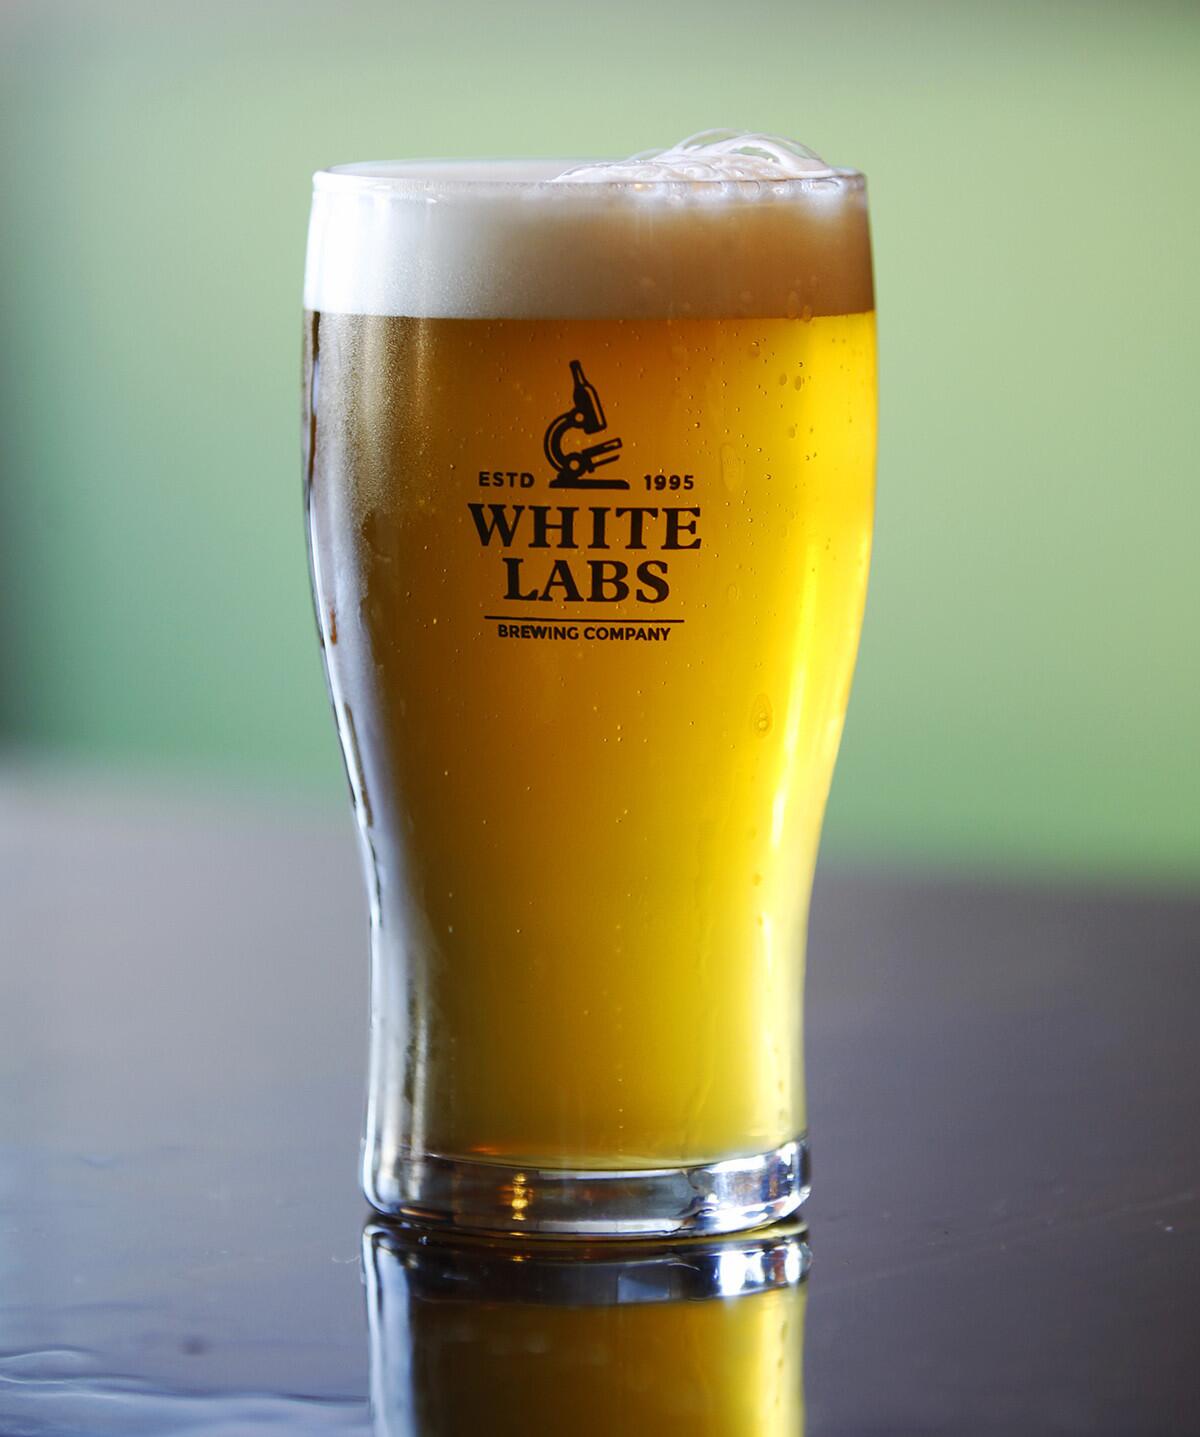 A wlp320 American Hefeweizen at White Labs in Mira Mesa.